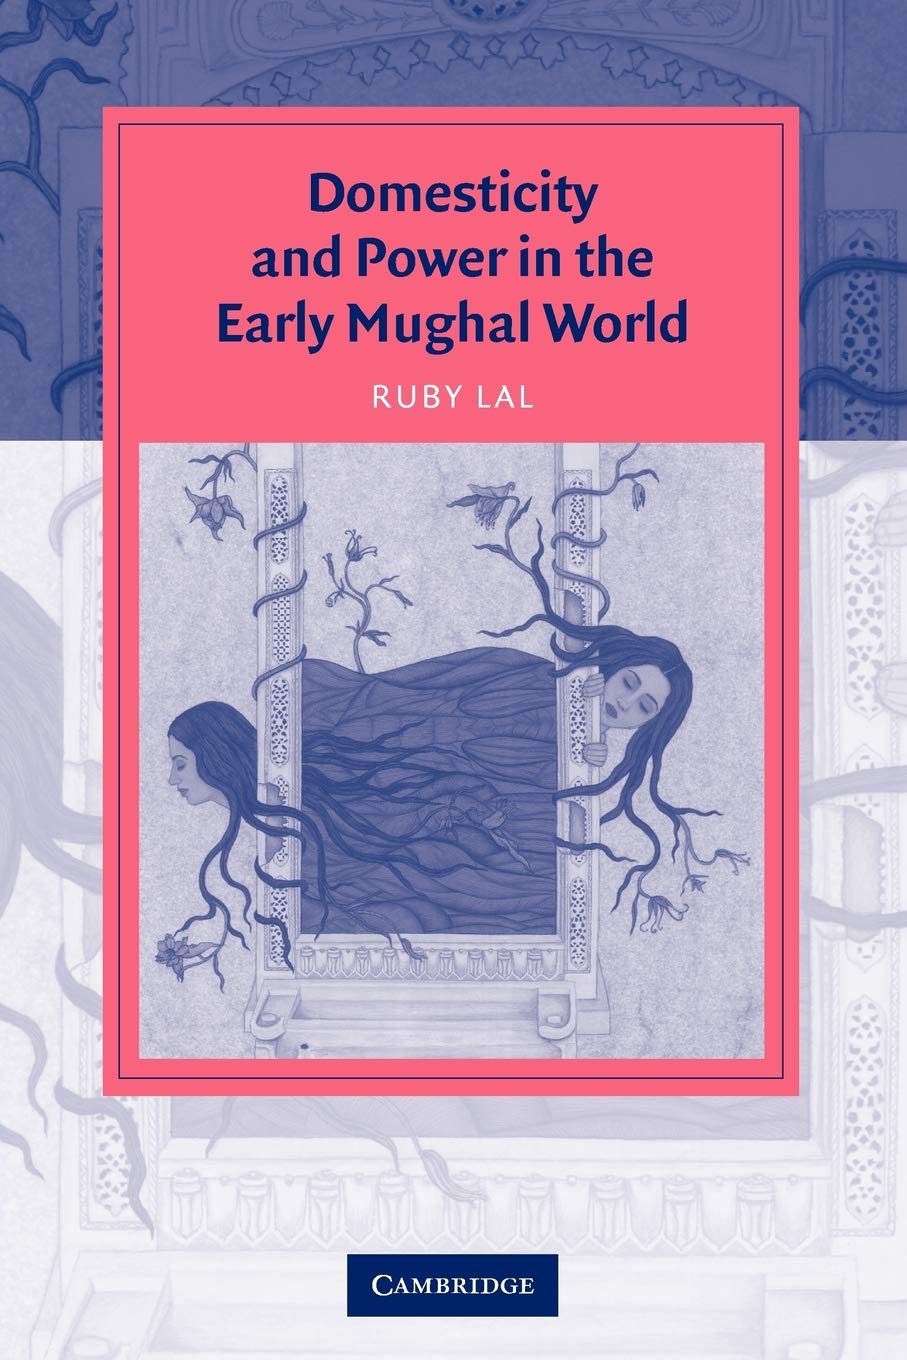 Domesticity and Power in the Early Mughal World by Ruby Lal